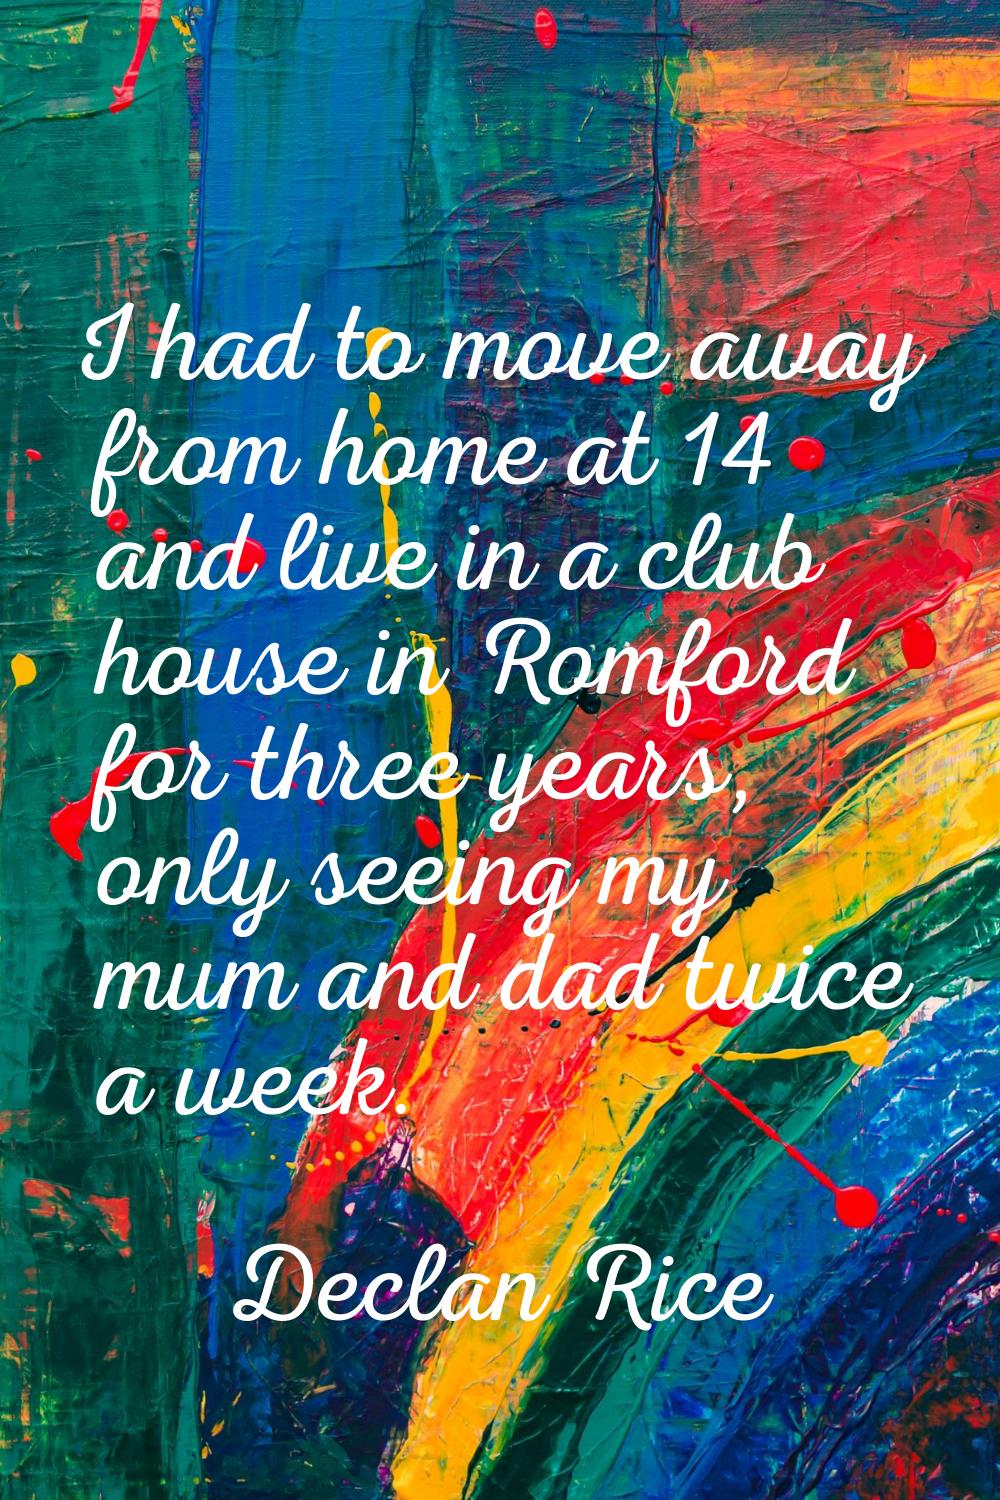 I had to move away from home at 14 and live in a club house in Romford for three years, only seeing